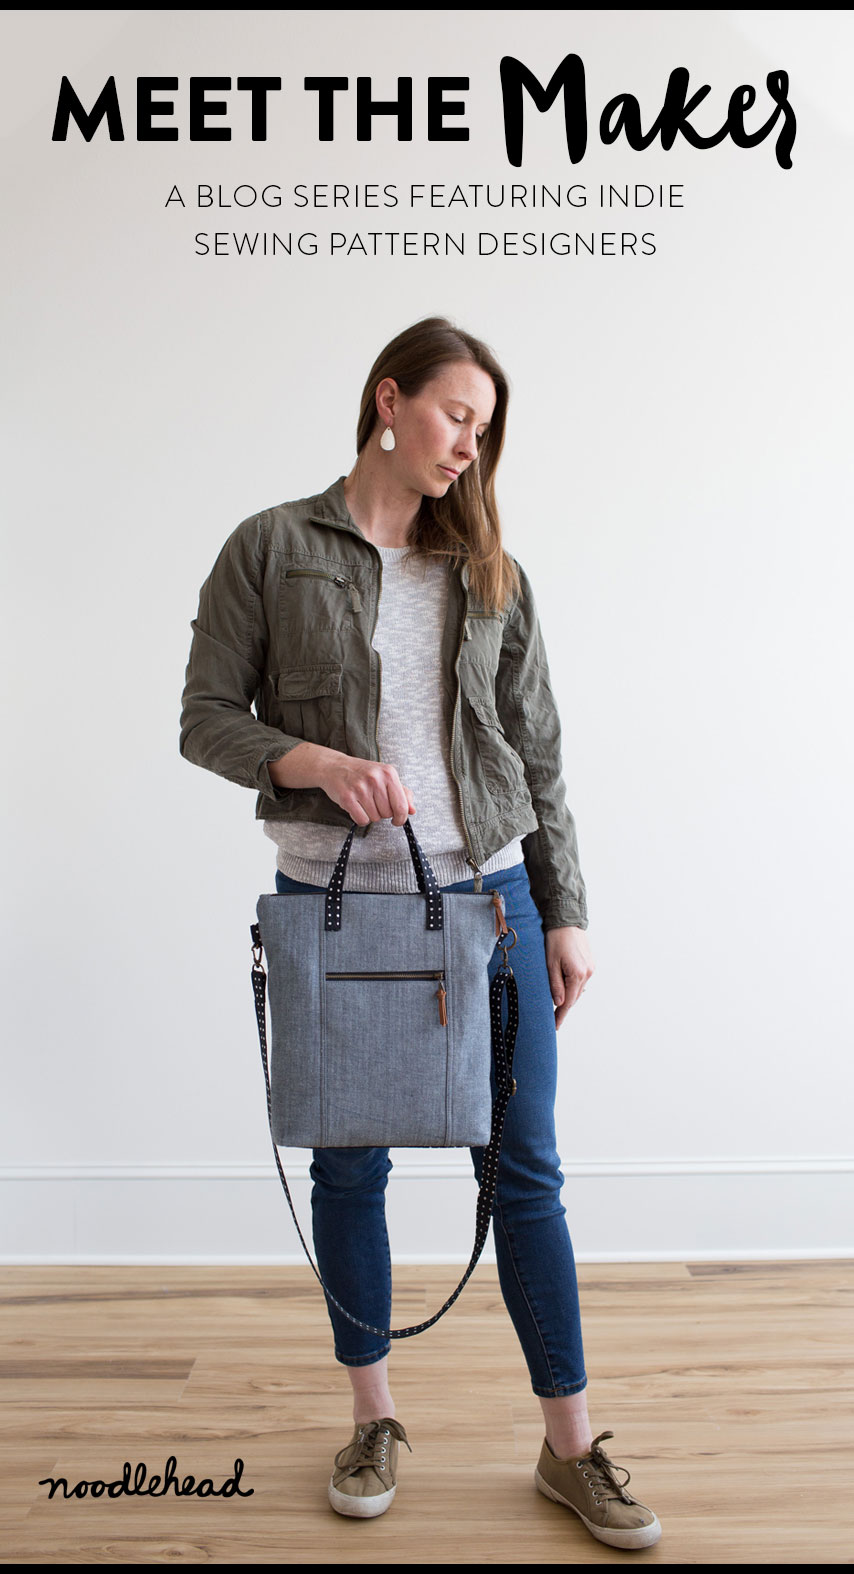 Meet the Maker blog series: Anna Gaham of Noodlehead creates simple, elegant, easy to follow bag patterns. Follow this blog series to learn about more pattern writers and artists in the sewing industry.